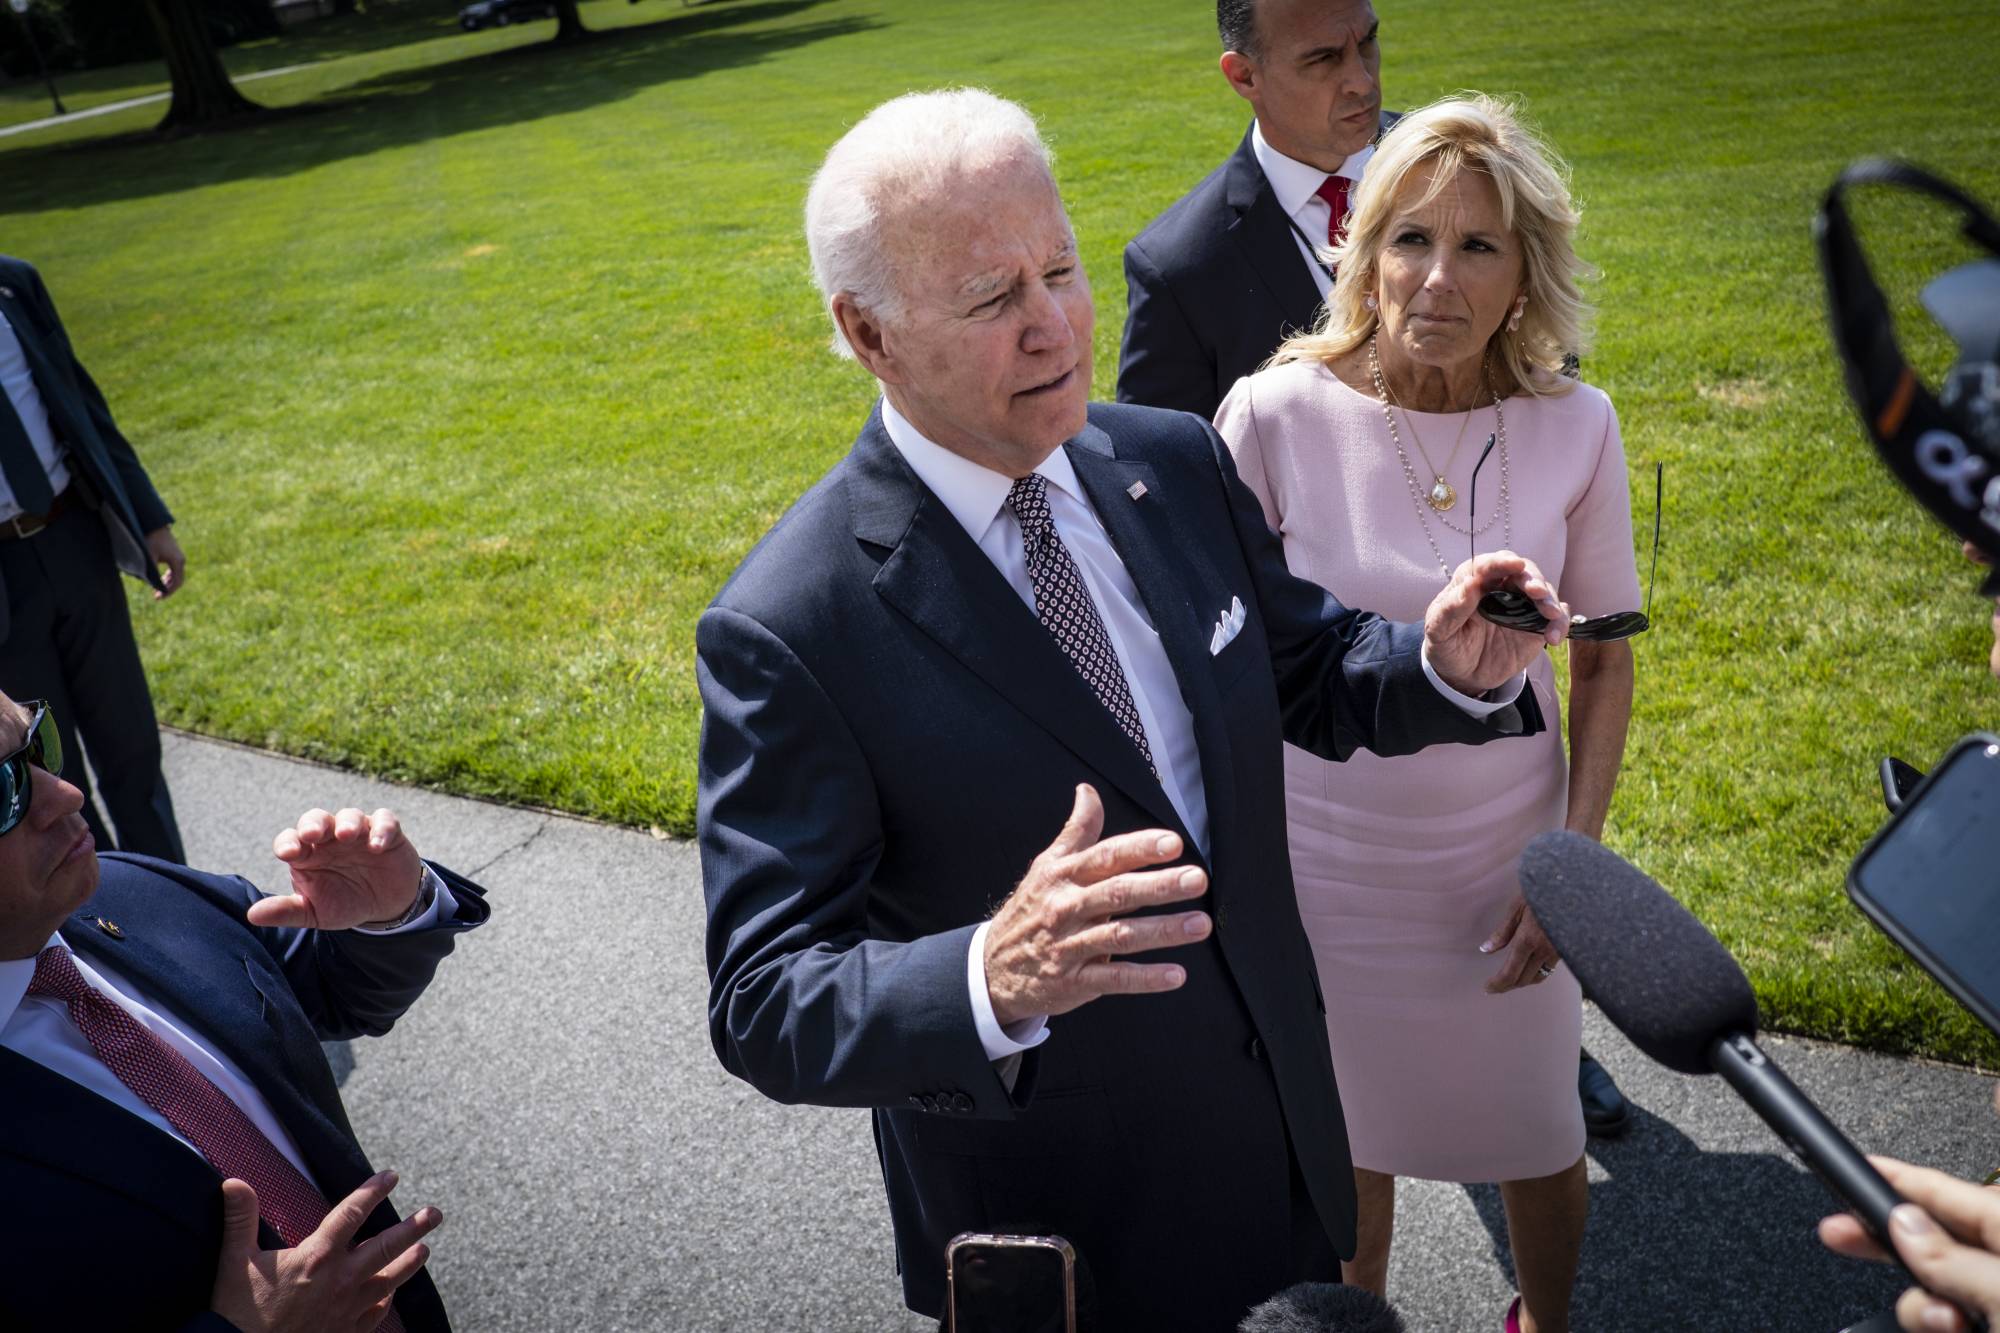 U.S. President Joe Biden and first lady Jill Biden before boarding Marine One at the White House in Washington on Friday. With no compromise in sight on a new agreement to revive the 2015 Iran nuclear deal that former President Donald Trump pulled the plug on and with Tehran making steady progress toward nuclear capability, the Biden administration could soon face a stark choice.  | PETE MAROVICH / THE NEW YORK TIMES